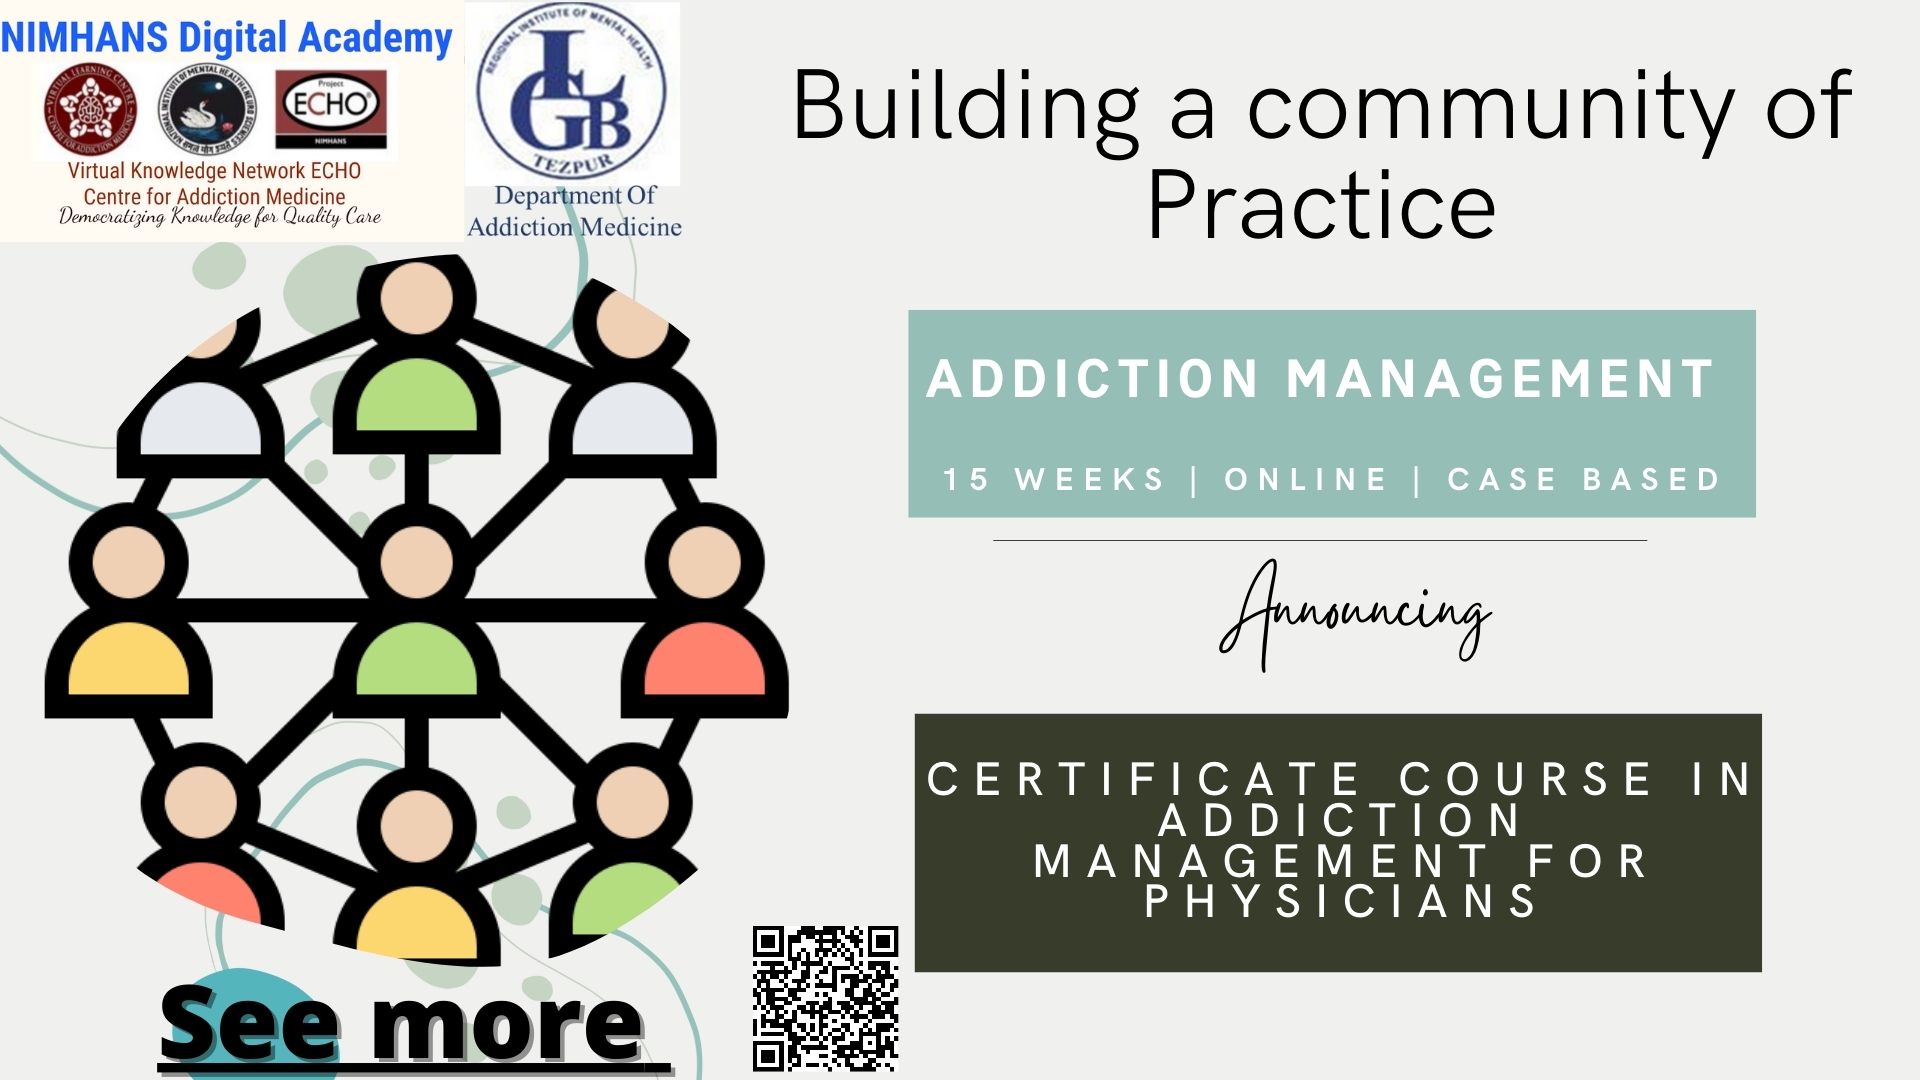 Running: July 22: Certificate course on the Basics of Addiction Management for Doctors 13.0  